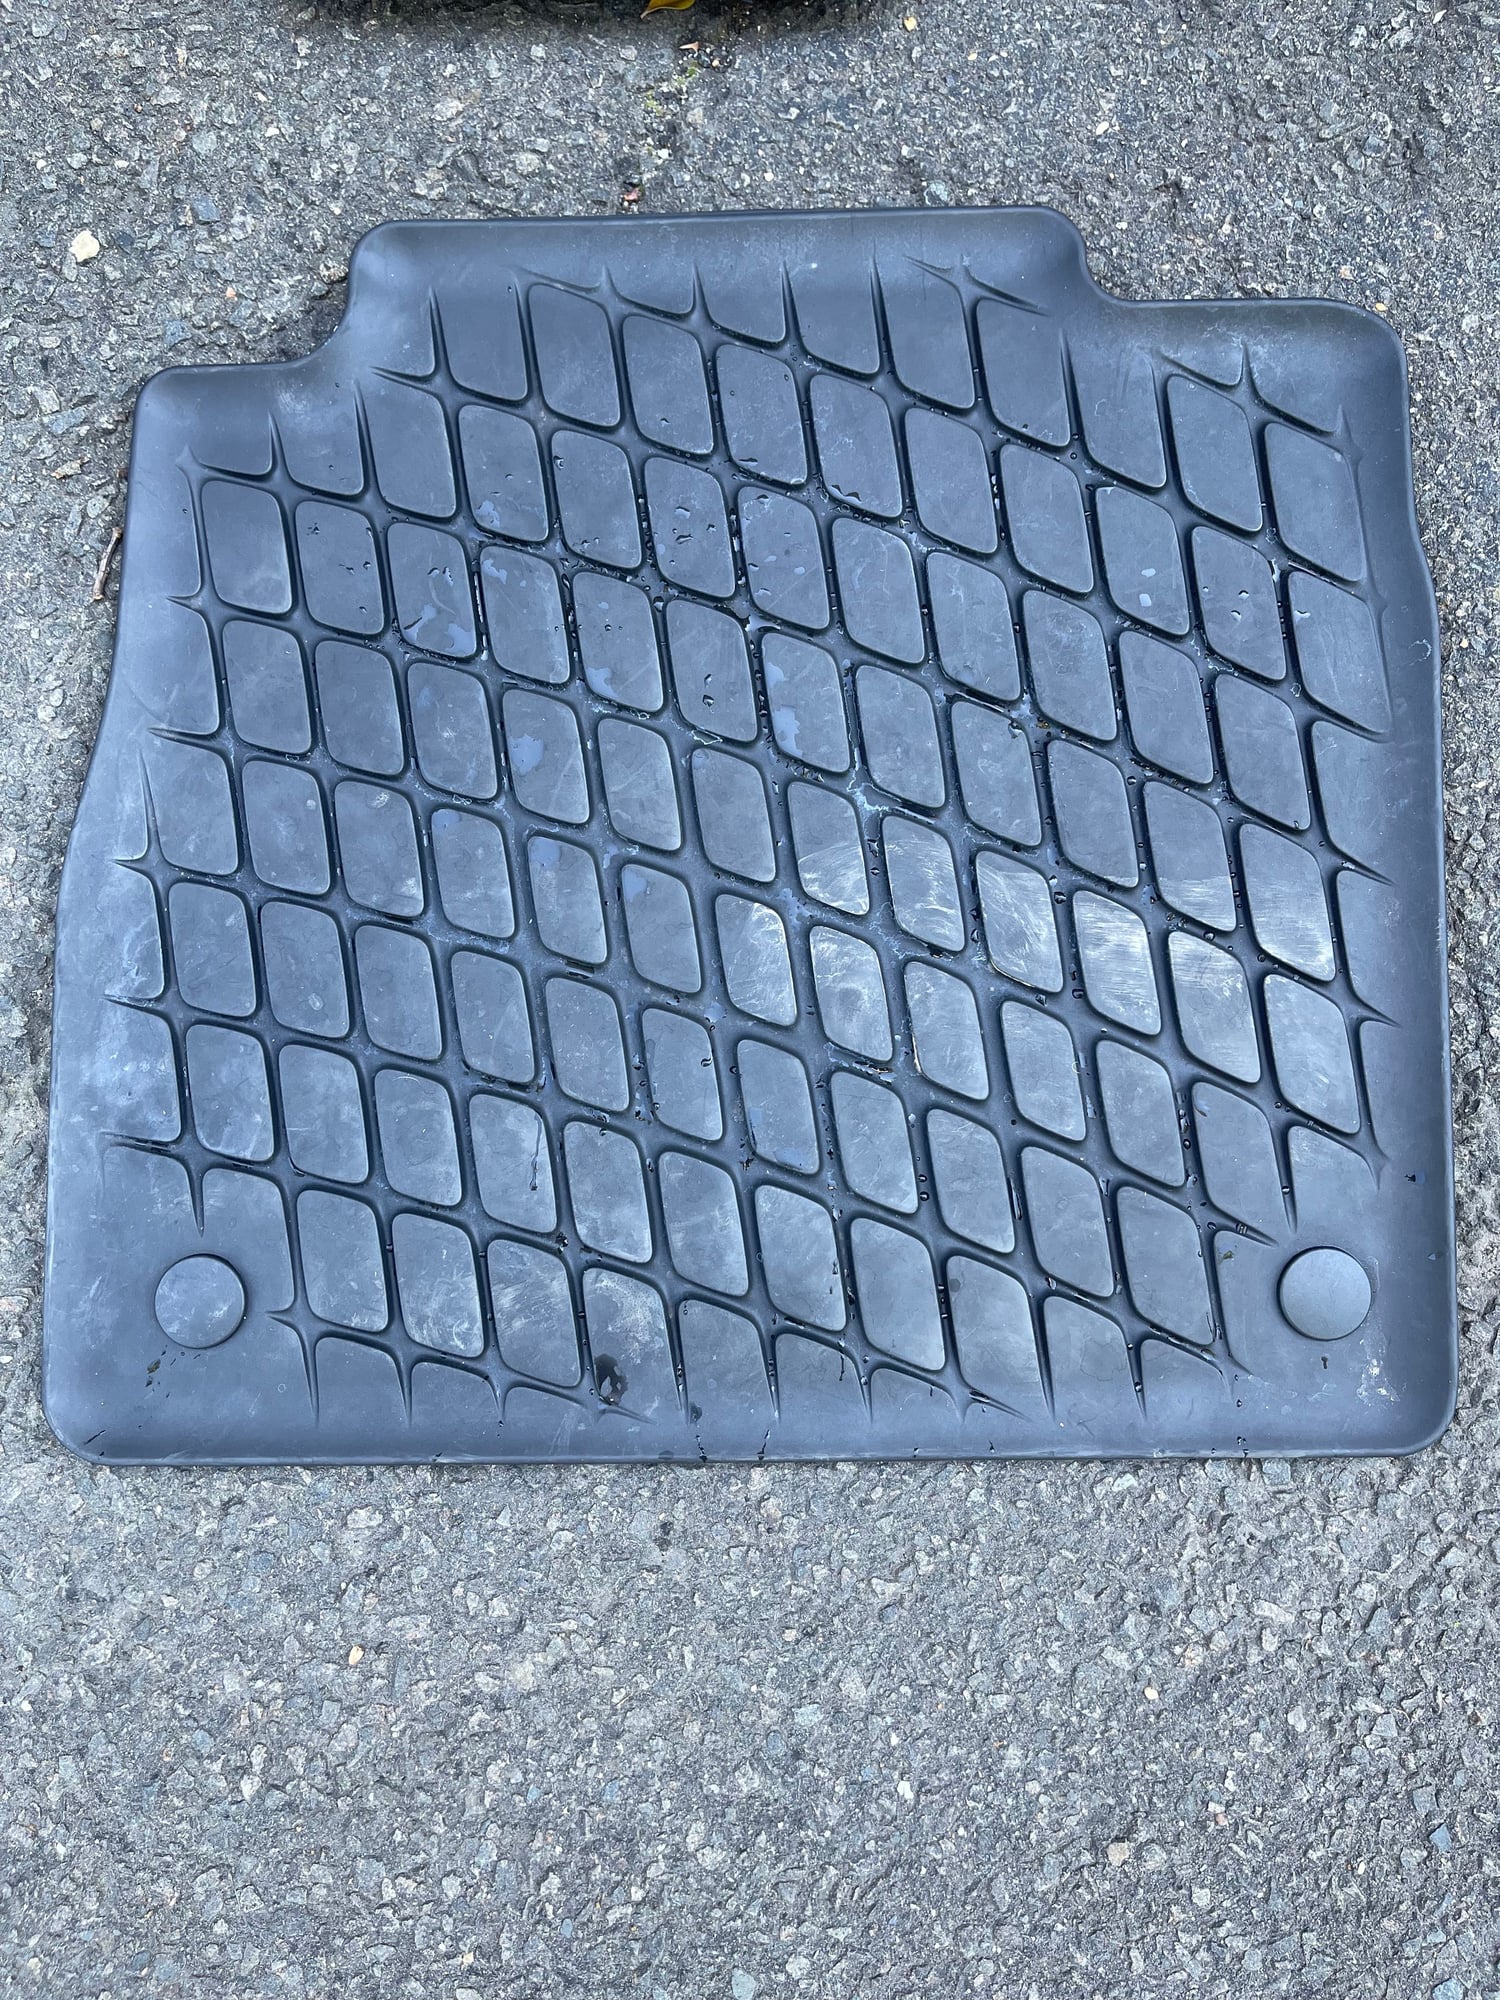 Interior/Upholstery - Mercedes OEM Floor mats - 2020+ GLS - Used - 2020 to 2023 Mercedes-Benz GLS450 - Wilton, CT 06897, United States